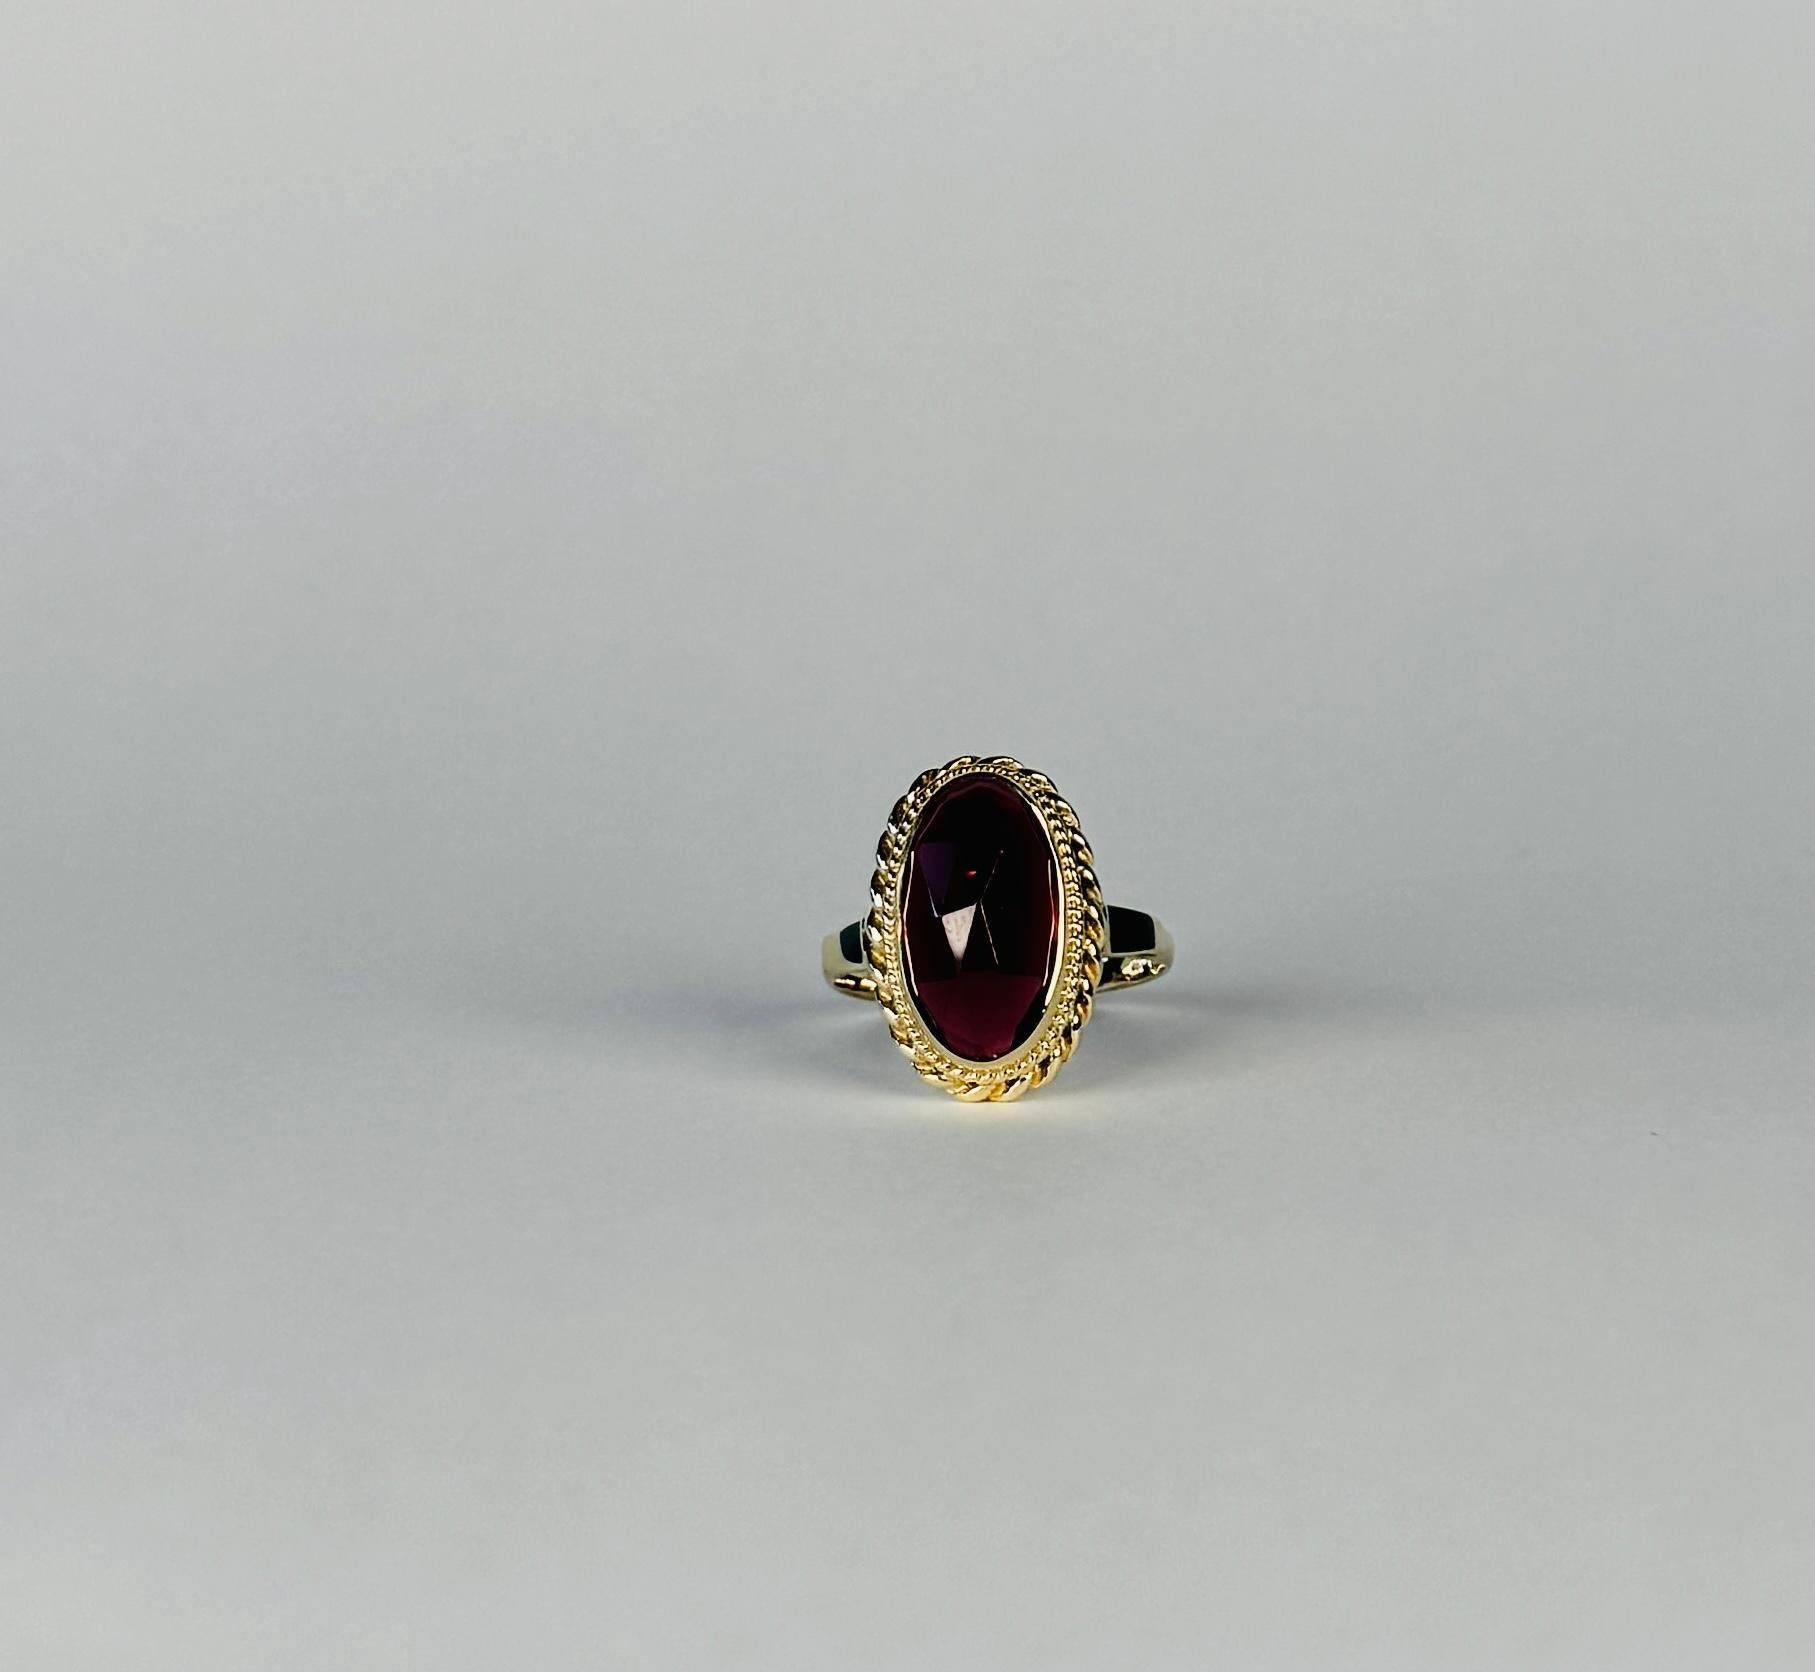 Pre-loved yellow gold ring which with a faceted garnet of approx. 4.66 carat. This stone is set in an open case setting. The ring features a twisted band and has beautiful  decorative details. The details of this pre-loved jewel is both charming as